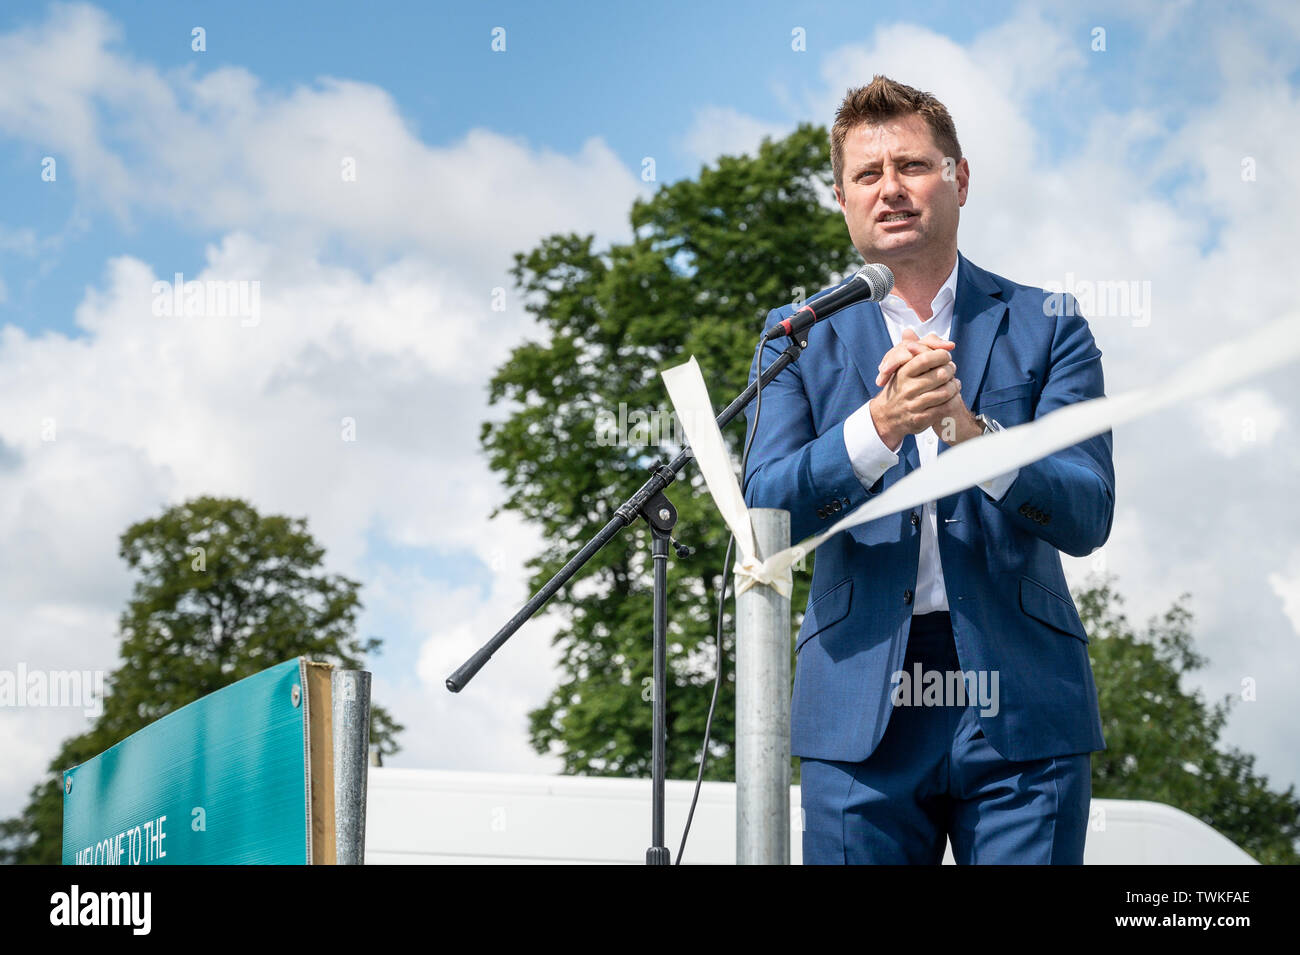 Blenheim Palace, Oxfordshire, UK. Friday 21st June 2019. Architect and television personality George Clarke opens The Blenheim Flower Show, which runs from 21st-23rd June. Andrew Walmsley/Alamy Live News Stock Photo